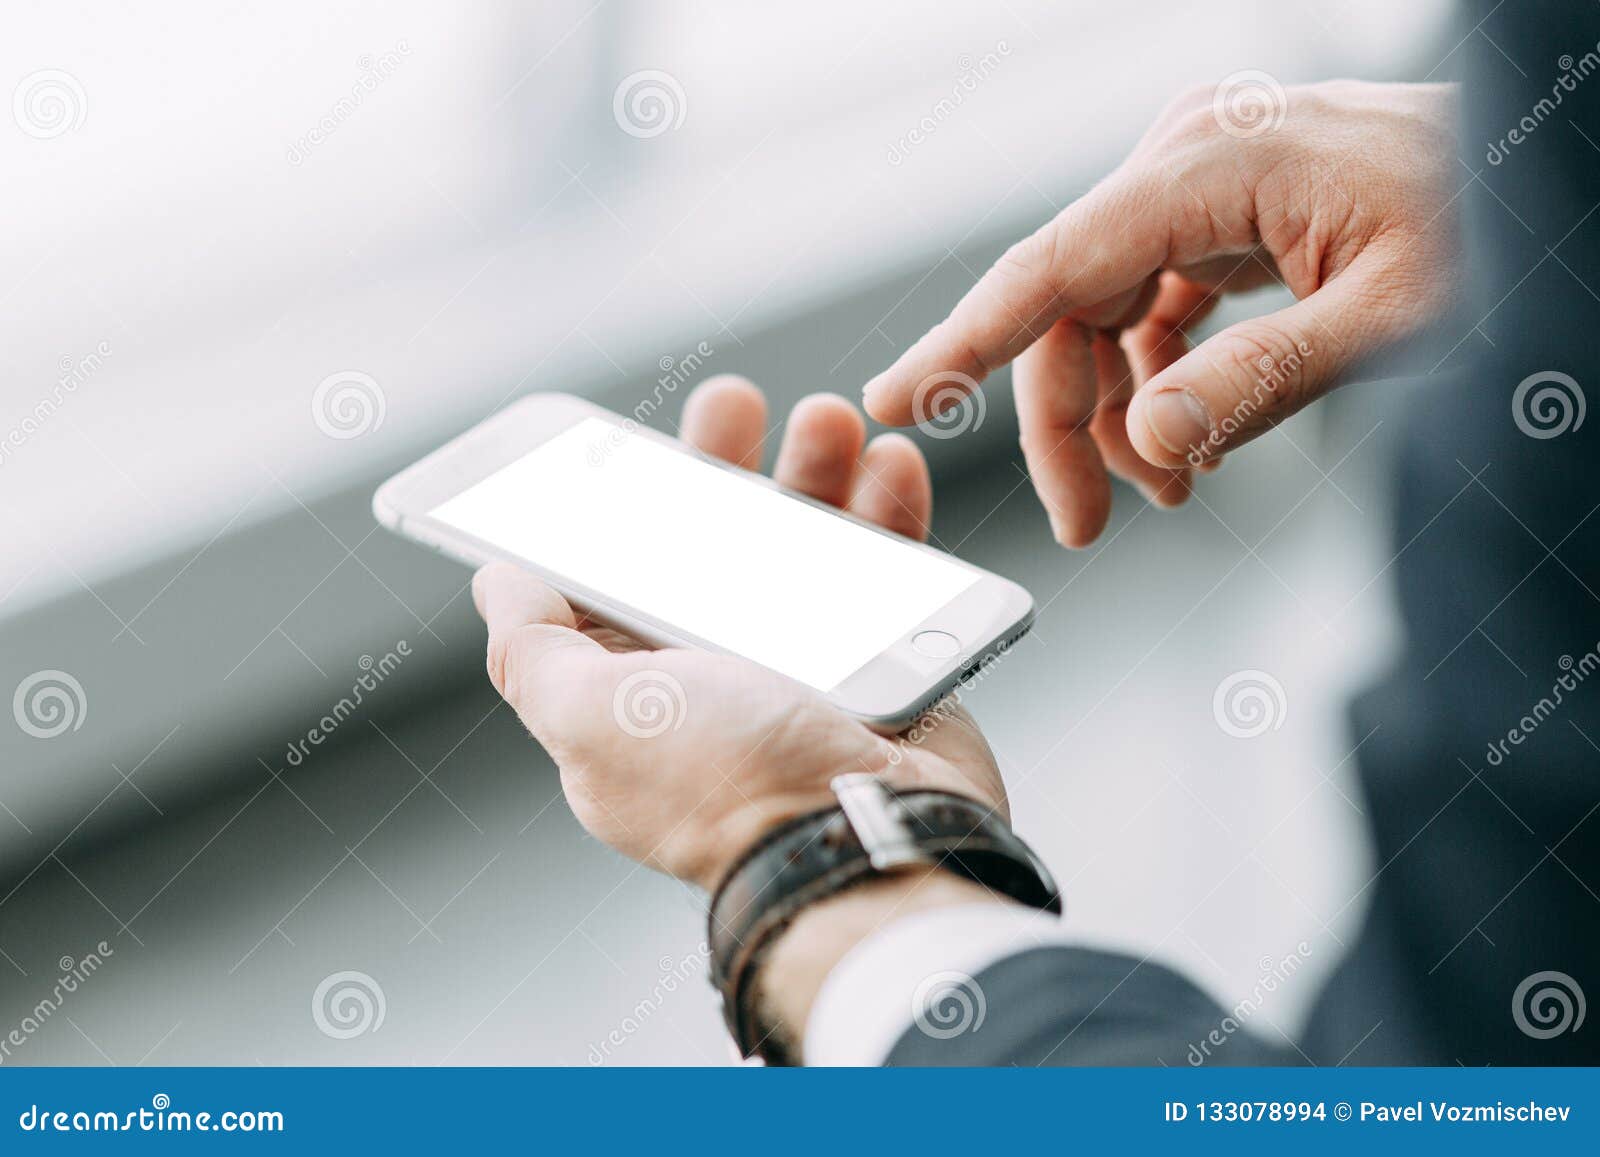 The Phone in the Hand of a Business Man Stock Photo - Image of ...